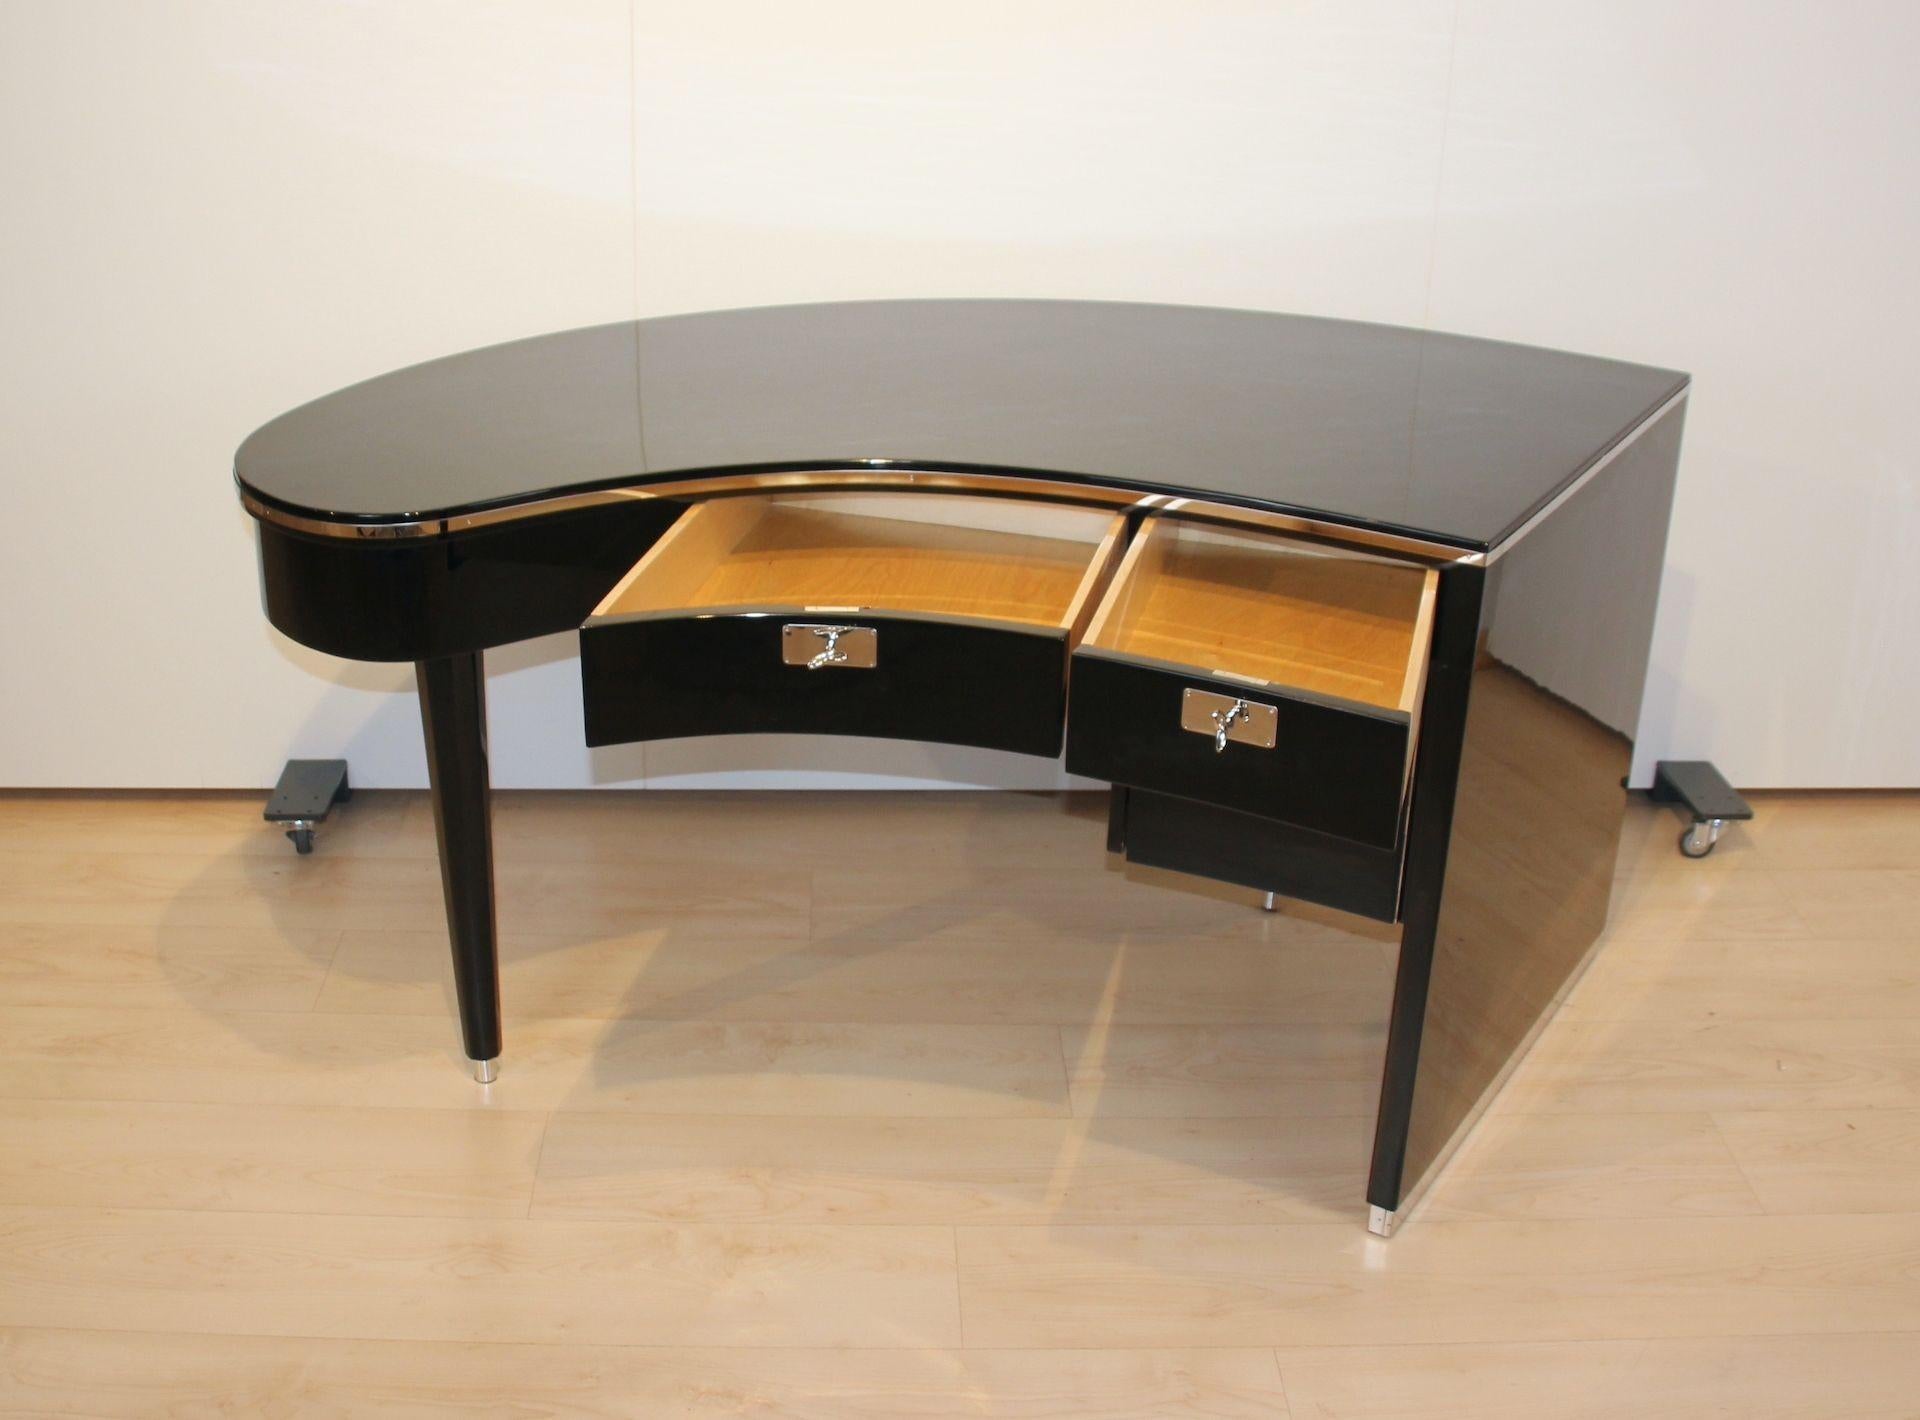 Design Desk, Curved Top, Piano Lacquer, Chrome, France, 1950s For Sale 6